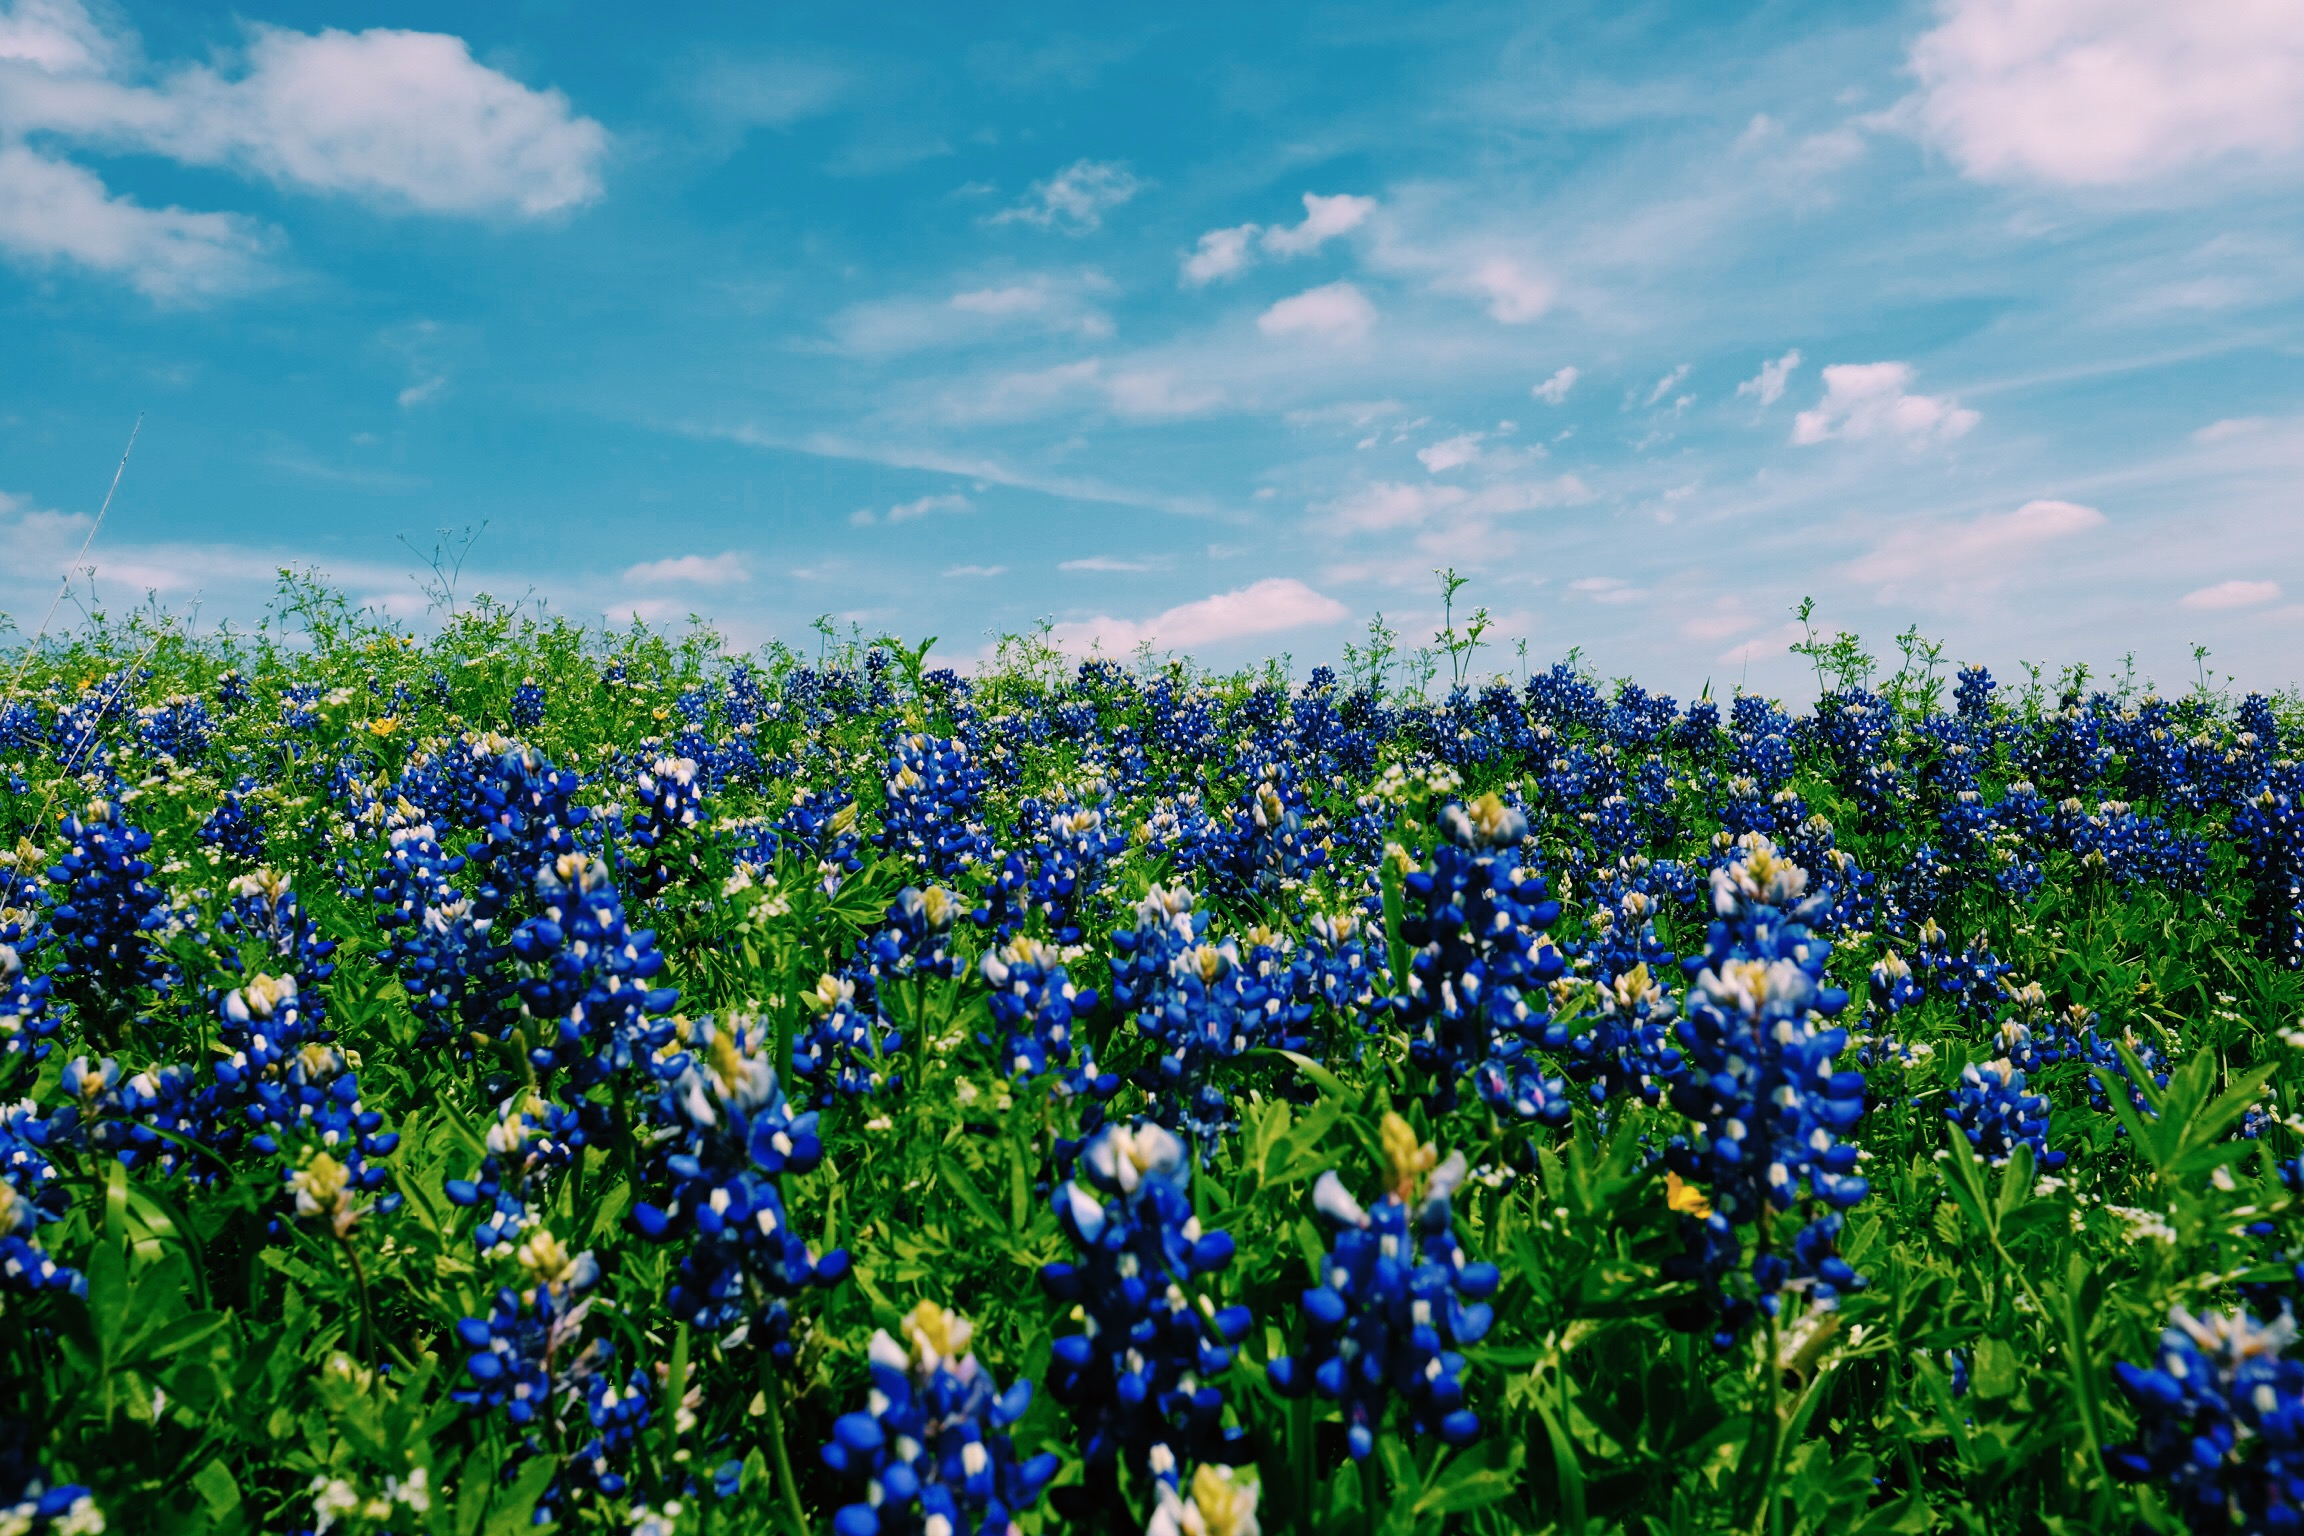 Field of bluebonnets with a blue sky and clouds.